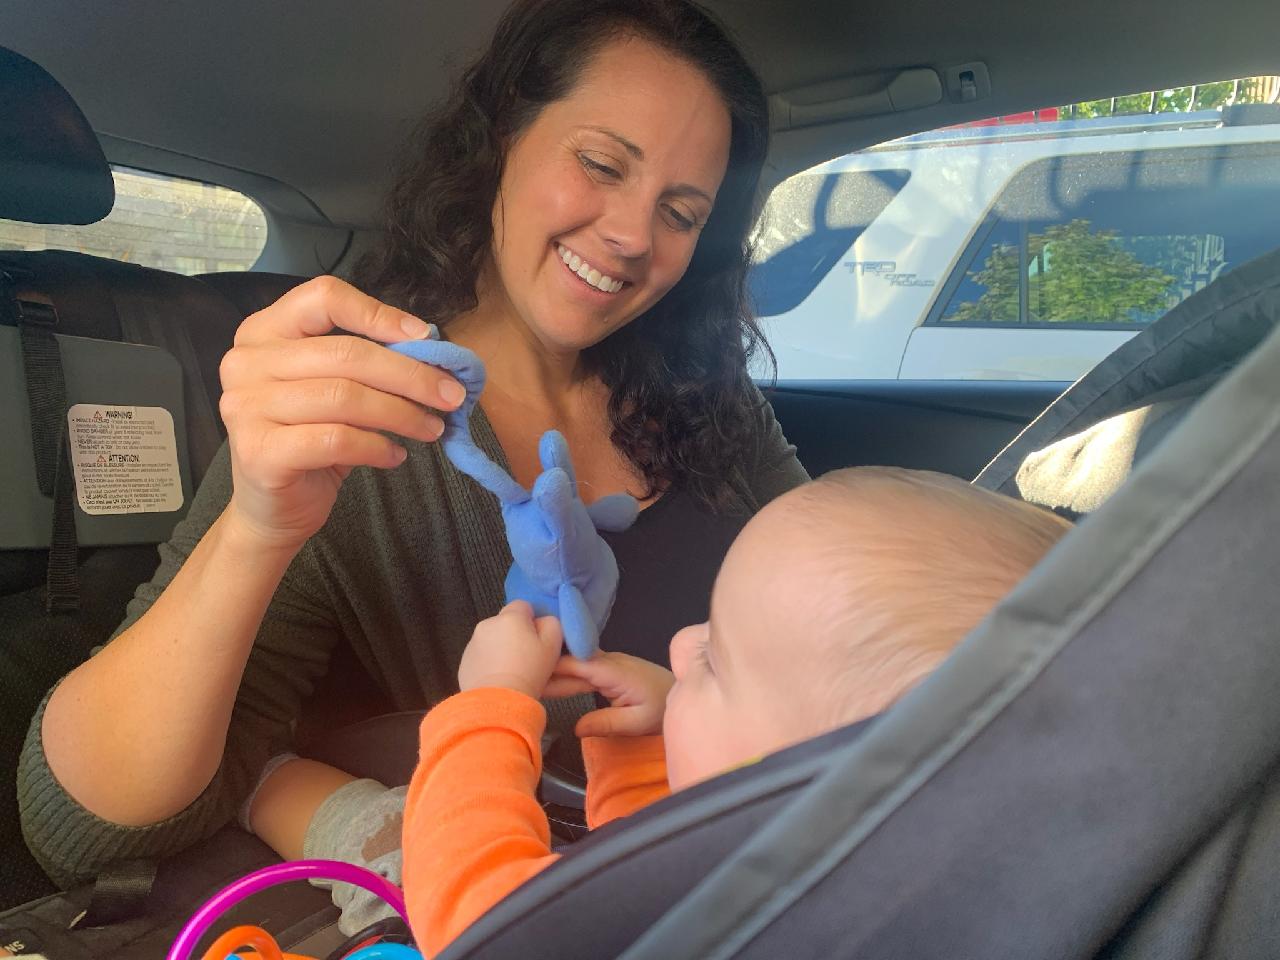 Mom holds up toy for baby in carseat to play with